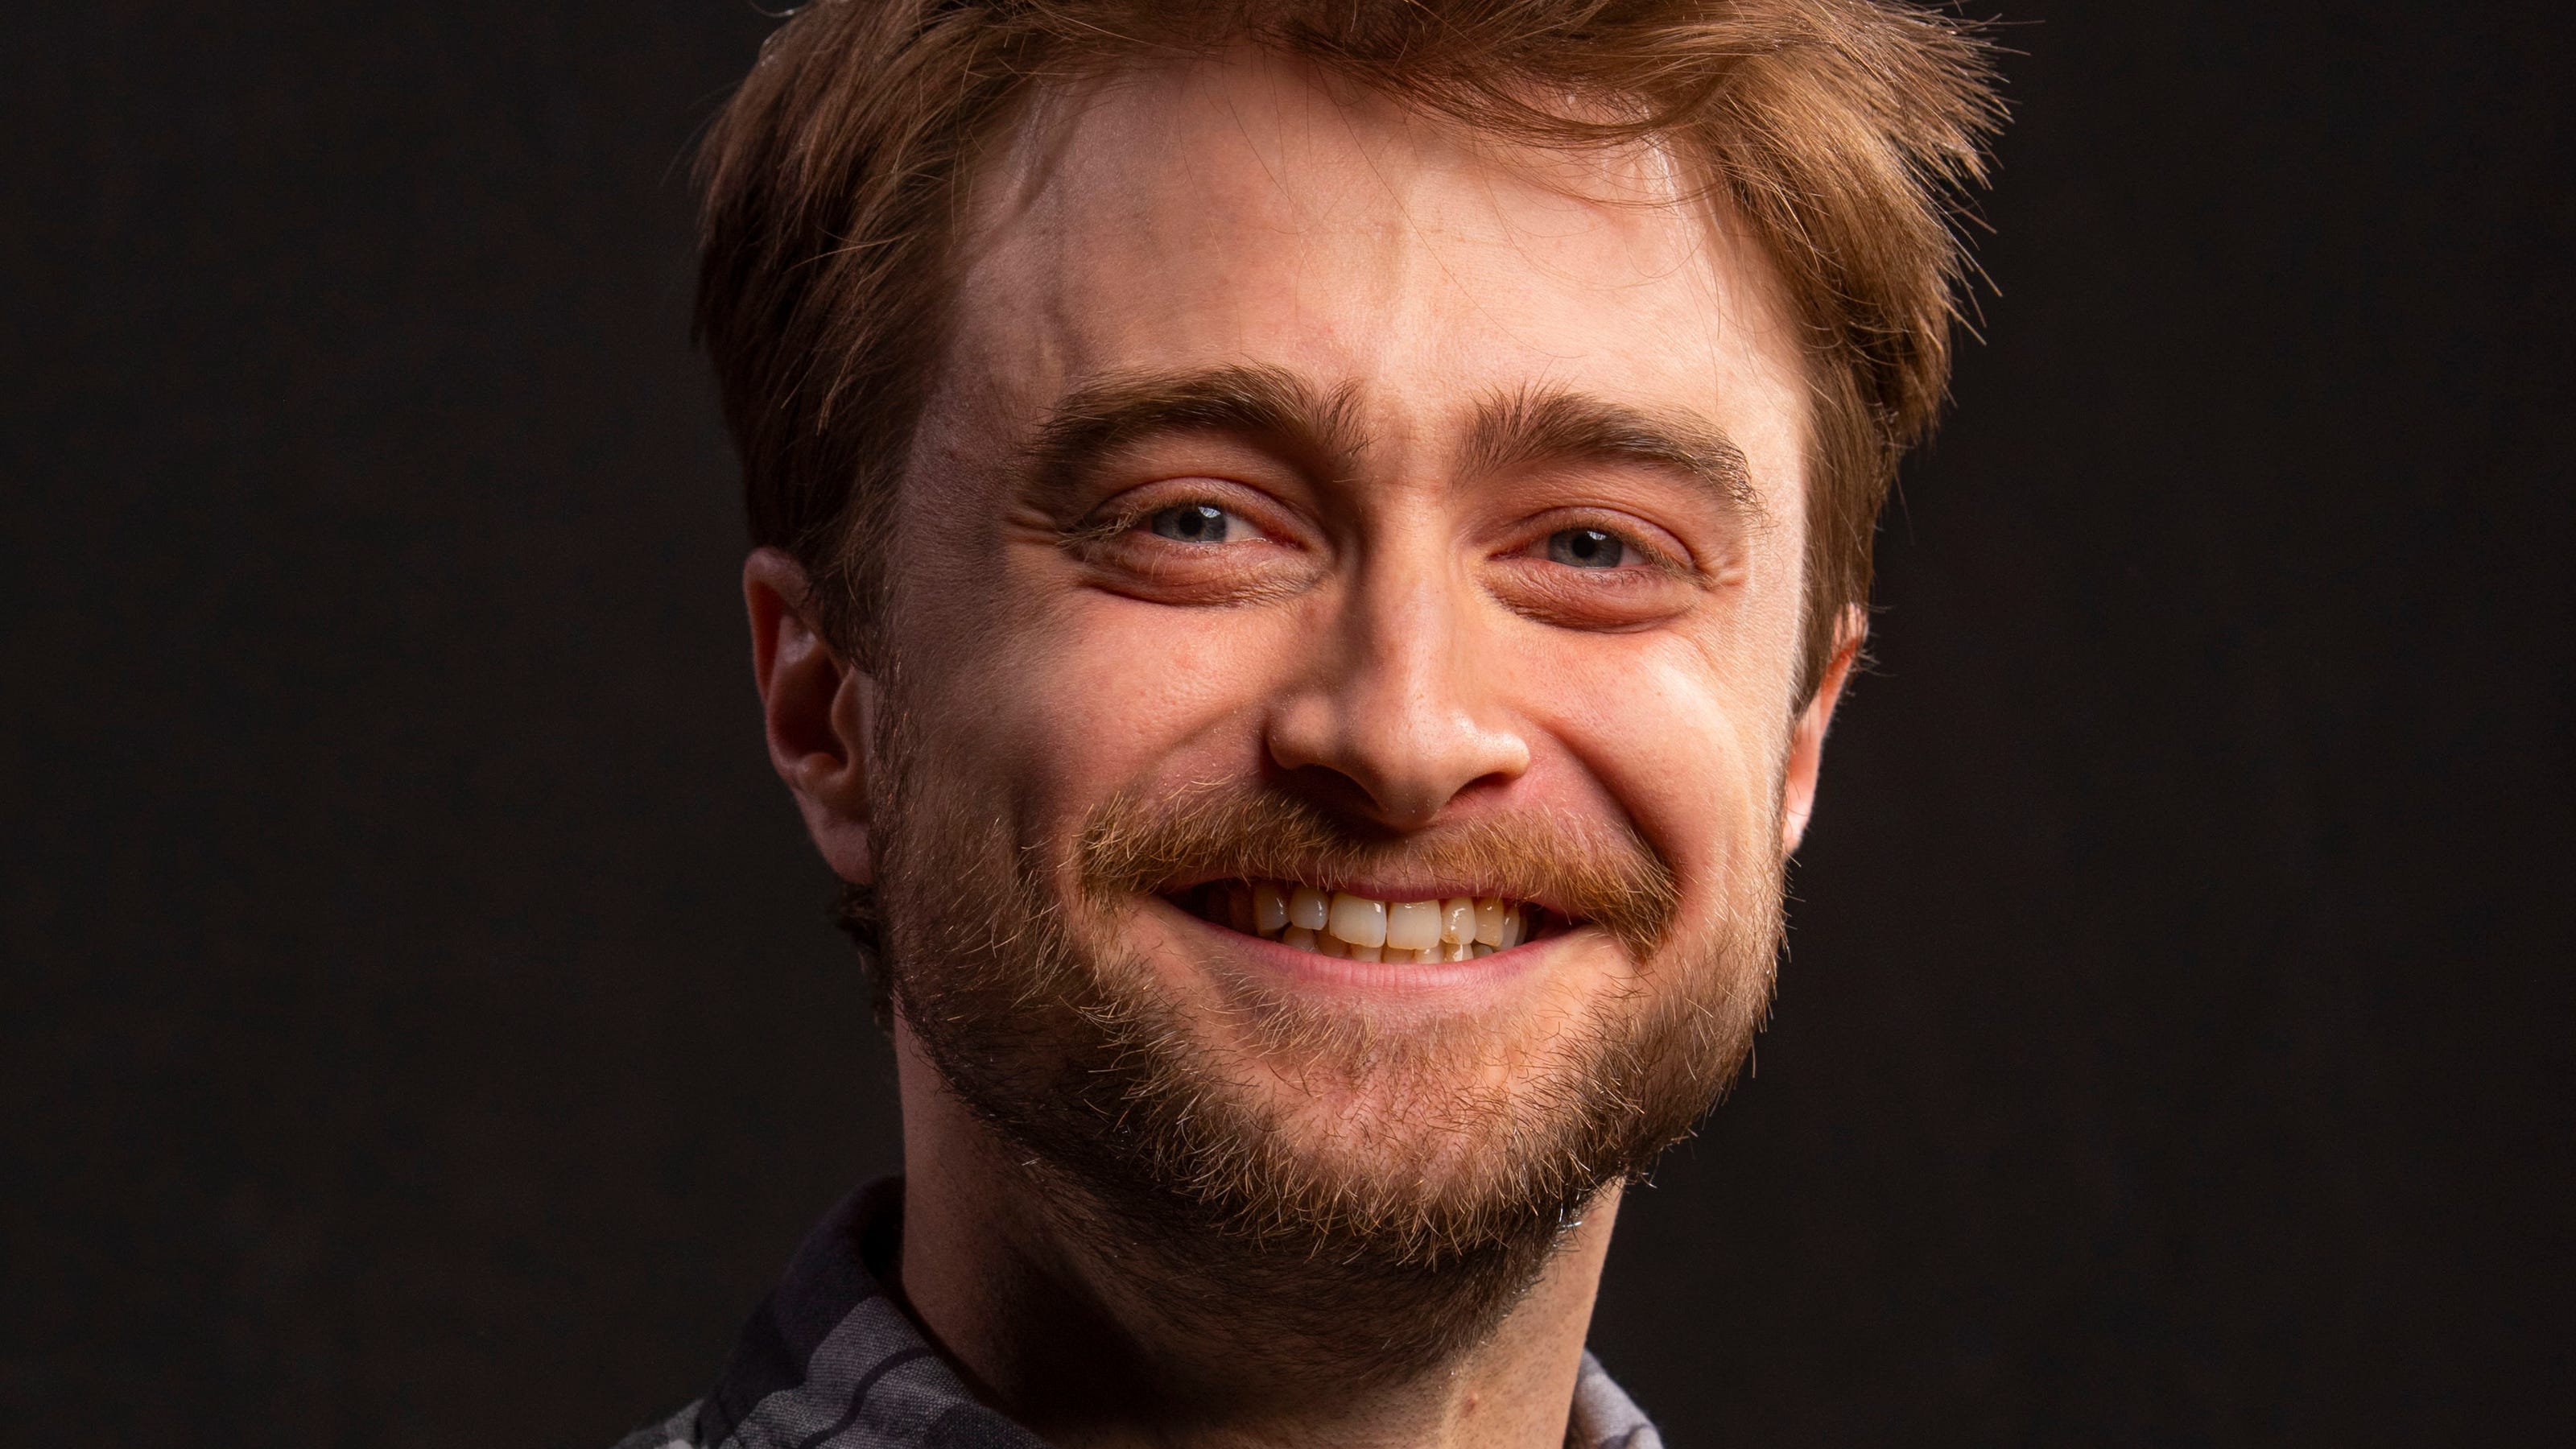 Daniel Radcliffe won't join Twitter, Instagram. Here's why